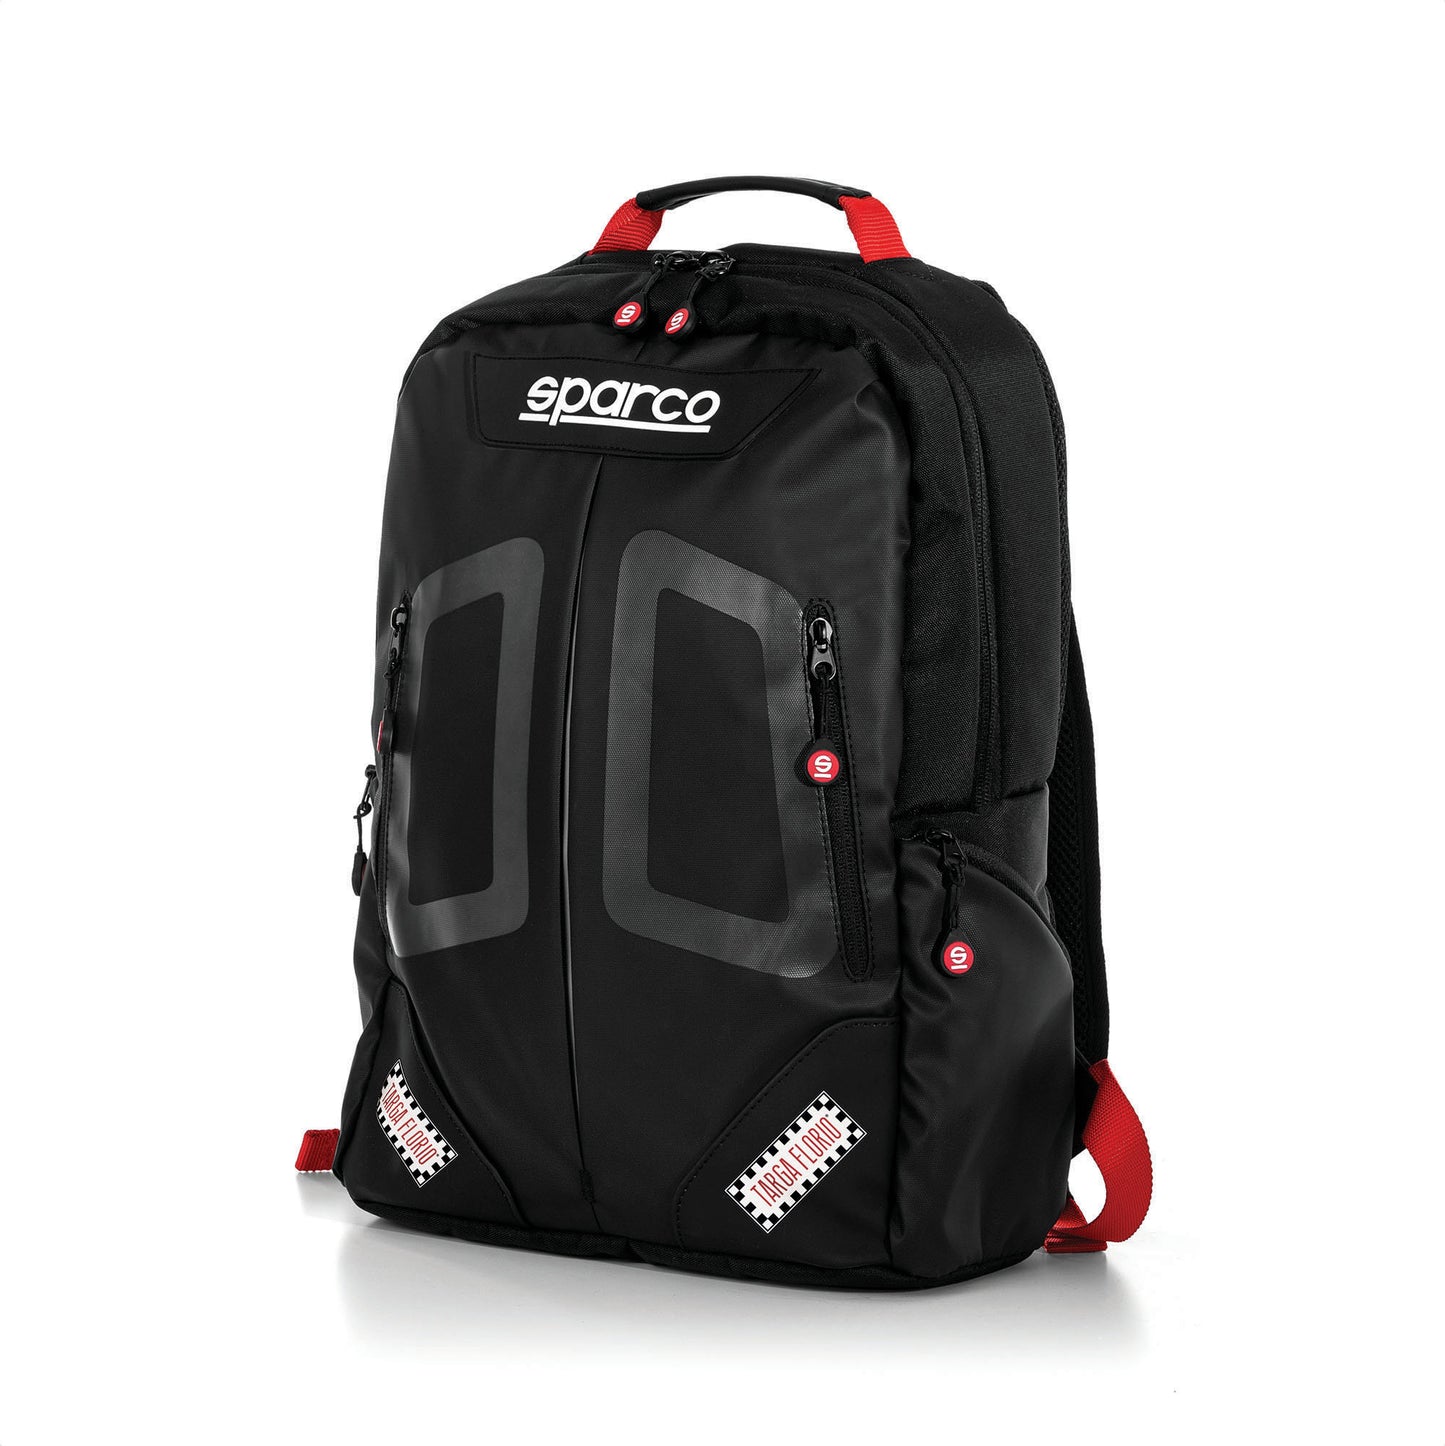 Sparco Targa Florio Stage Backpack Rucksack Bag Soft Touch Fabric Made in Italy